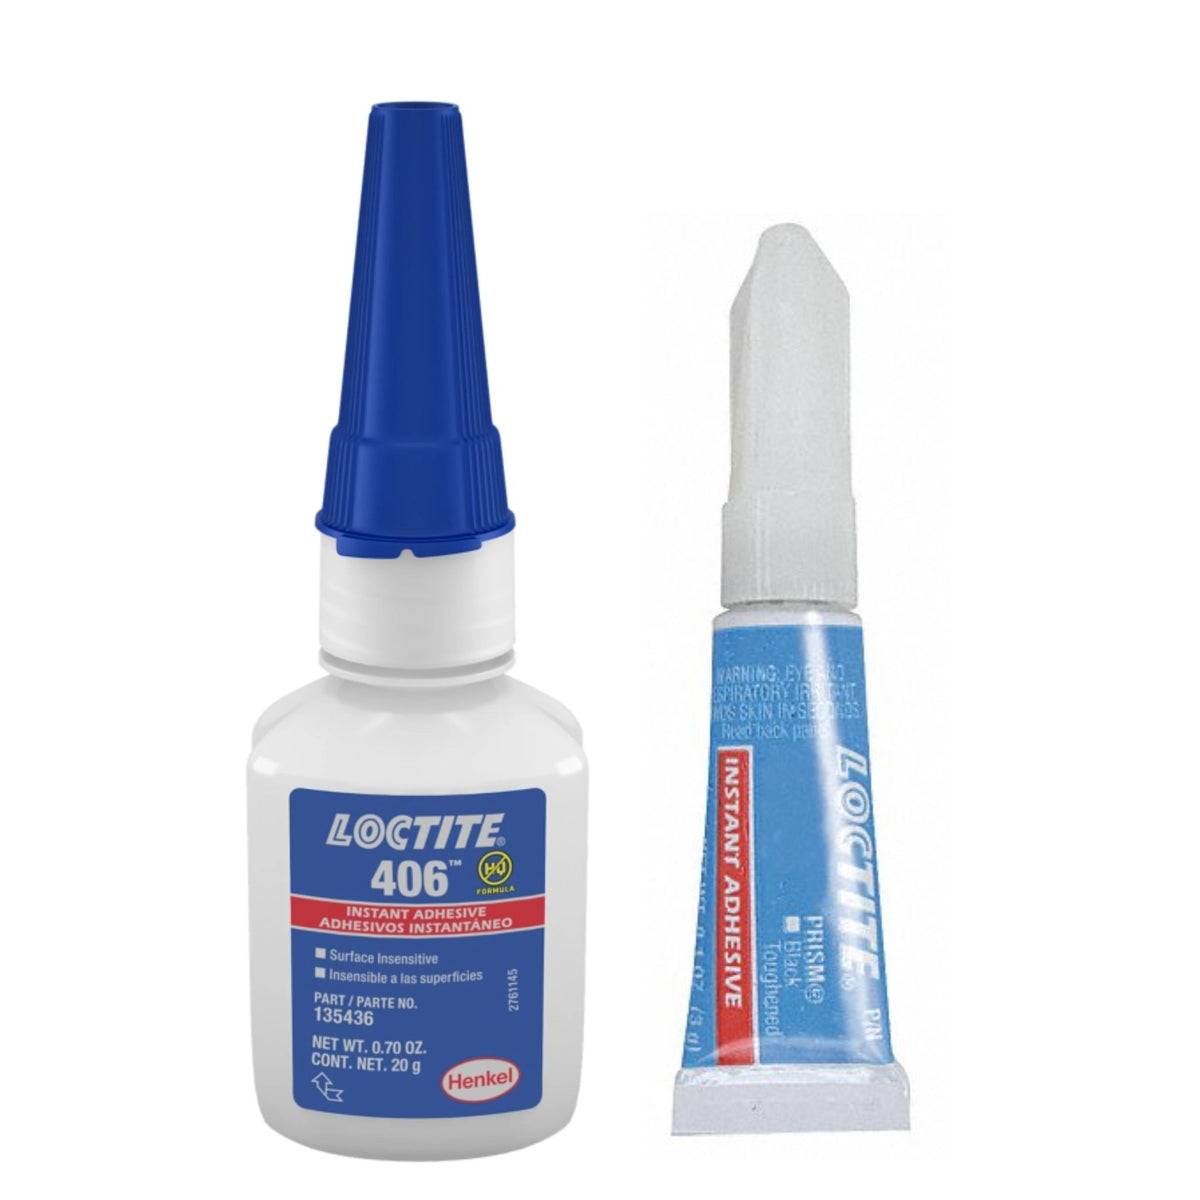 10 x Henkel Loctite 406 Instant Adhesives Super Glue 20g FREE SHIPPING  TRACKING